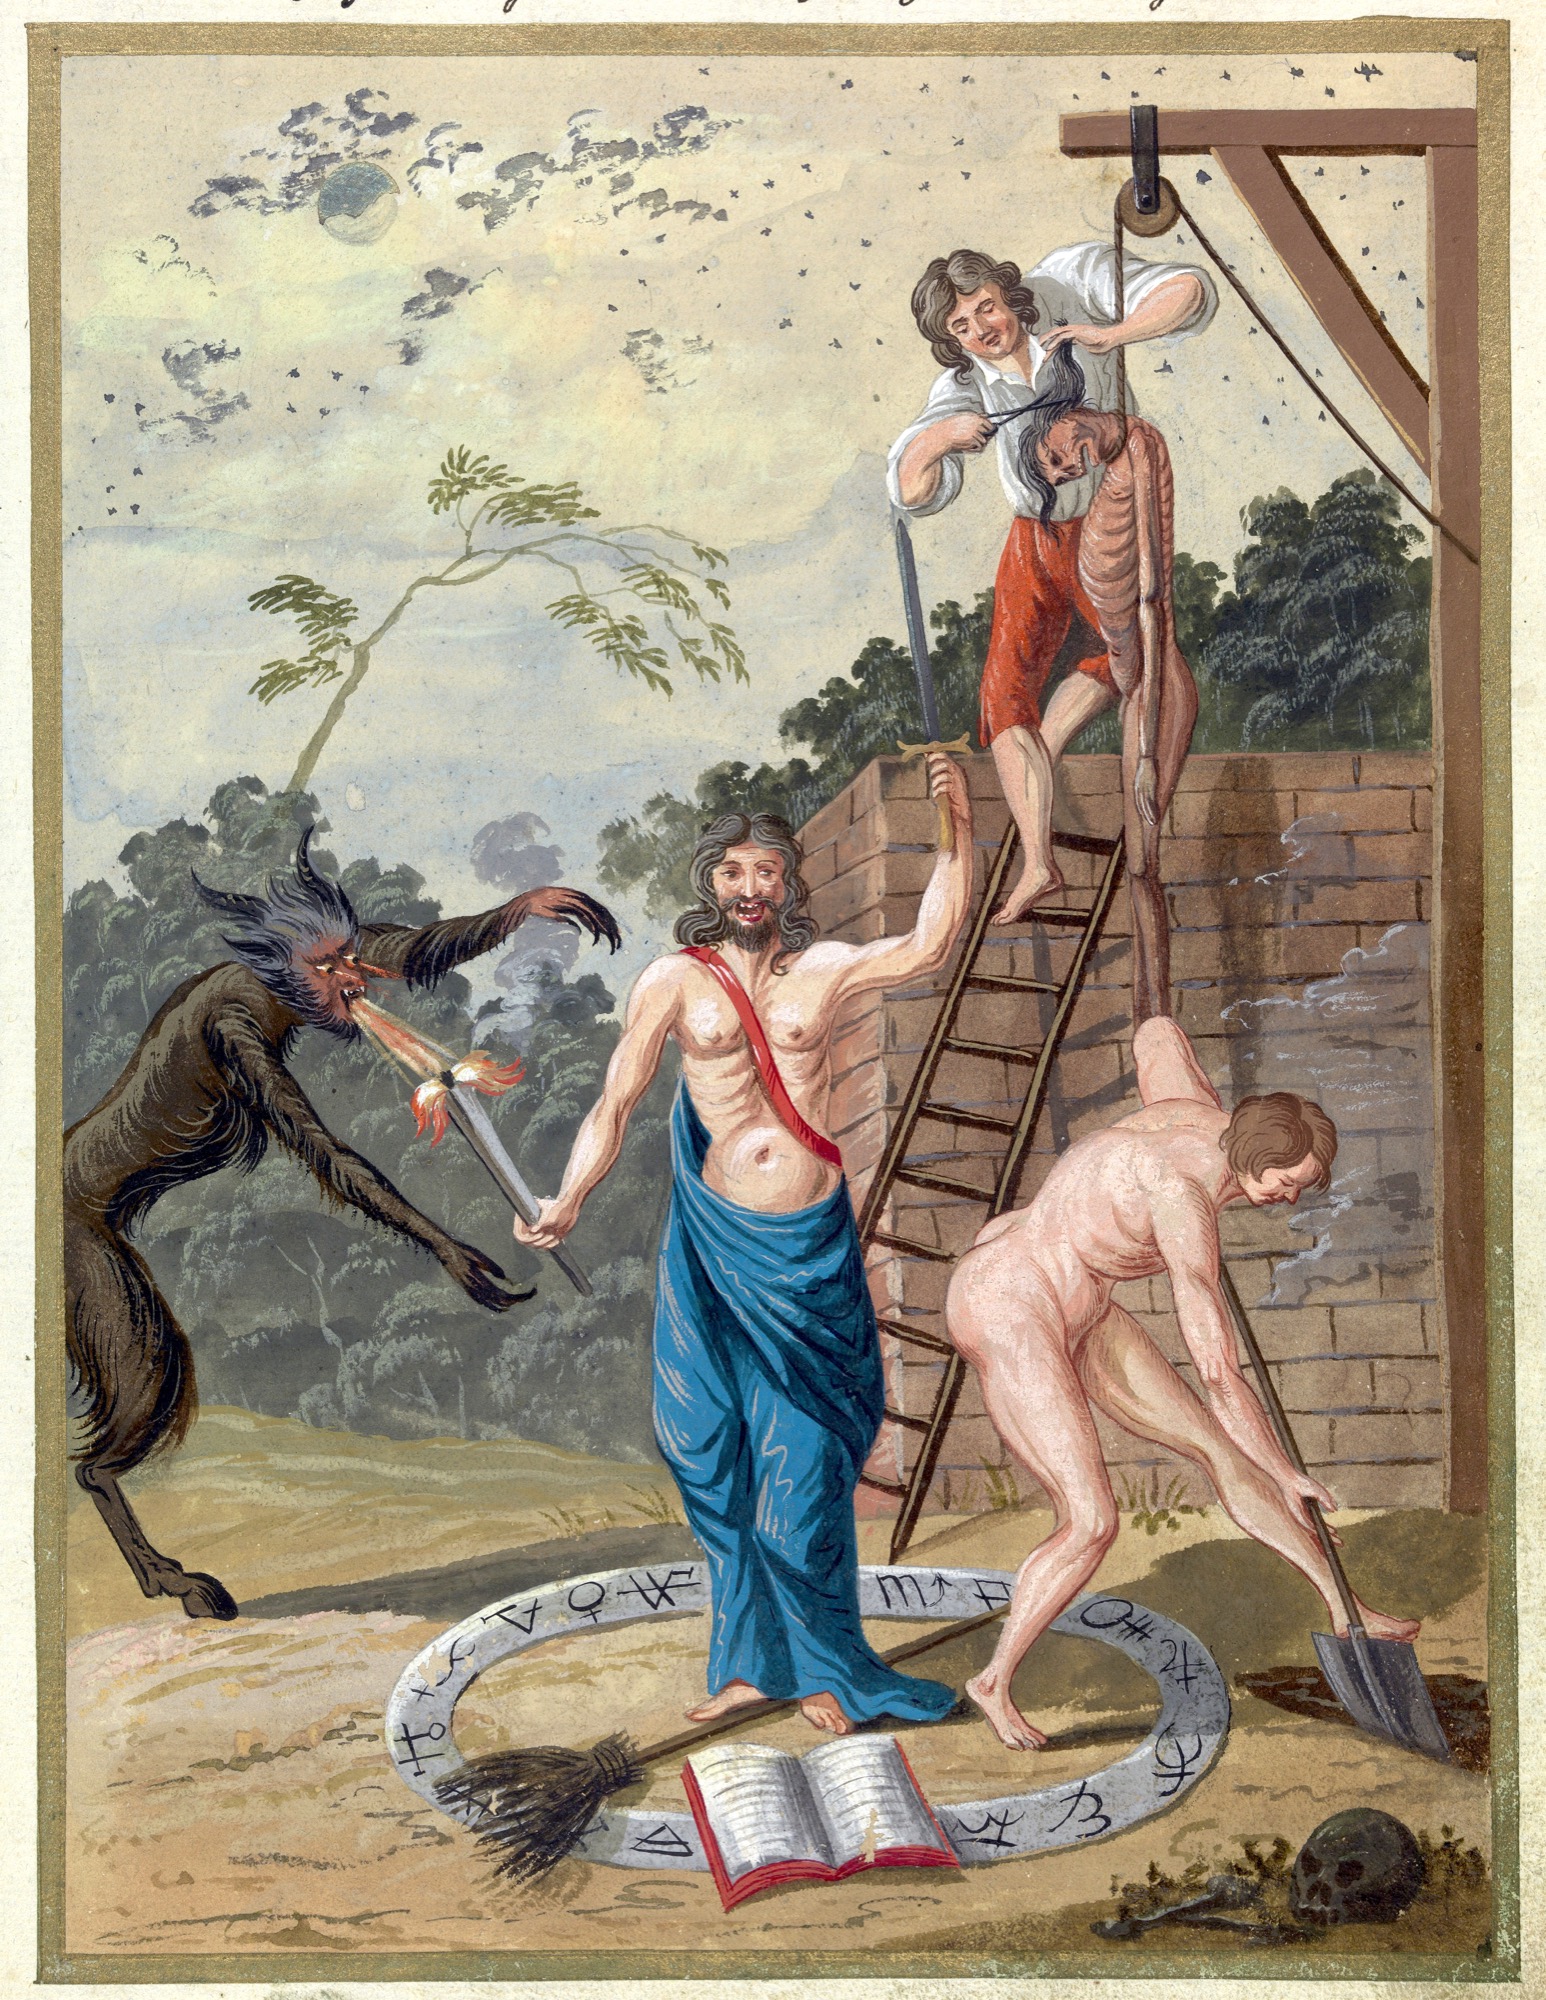 L0076361 A compendium about demons and magic. MS 1766. Credit: Wellcome Library, London. Wellcome Images images@wellcome.ac.uk http://wellcomeimages.org Compendium rarissimum totius Artis Magicae sistematisatae per celeberrimos Artis hujus Magistros. Anno 1057. Noli me tangere. Watercolour c. 1775 Published:  -  Copyrighted work available under Creative Commons Attribution only licence CC BY 4.0 http://creativecommons.org/licenses/by/4.0/